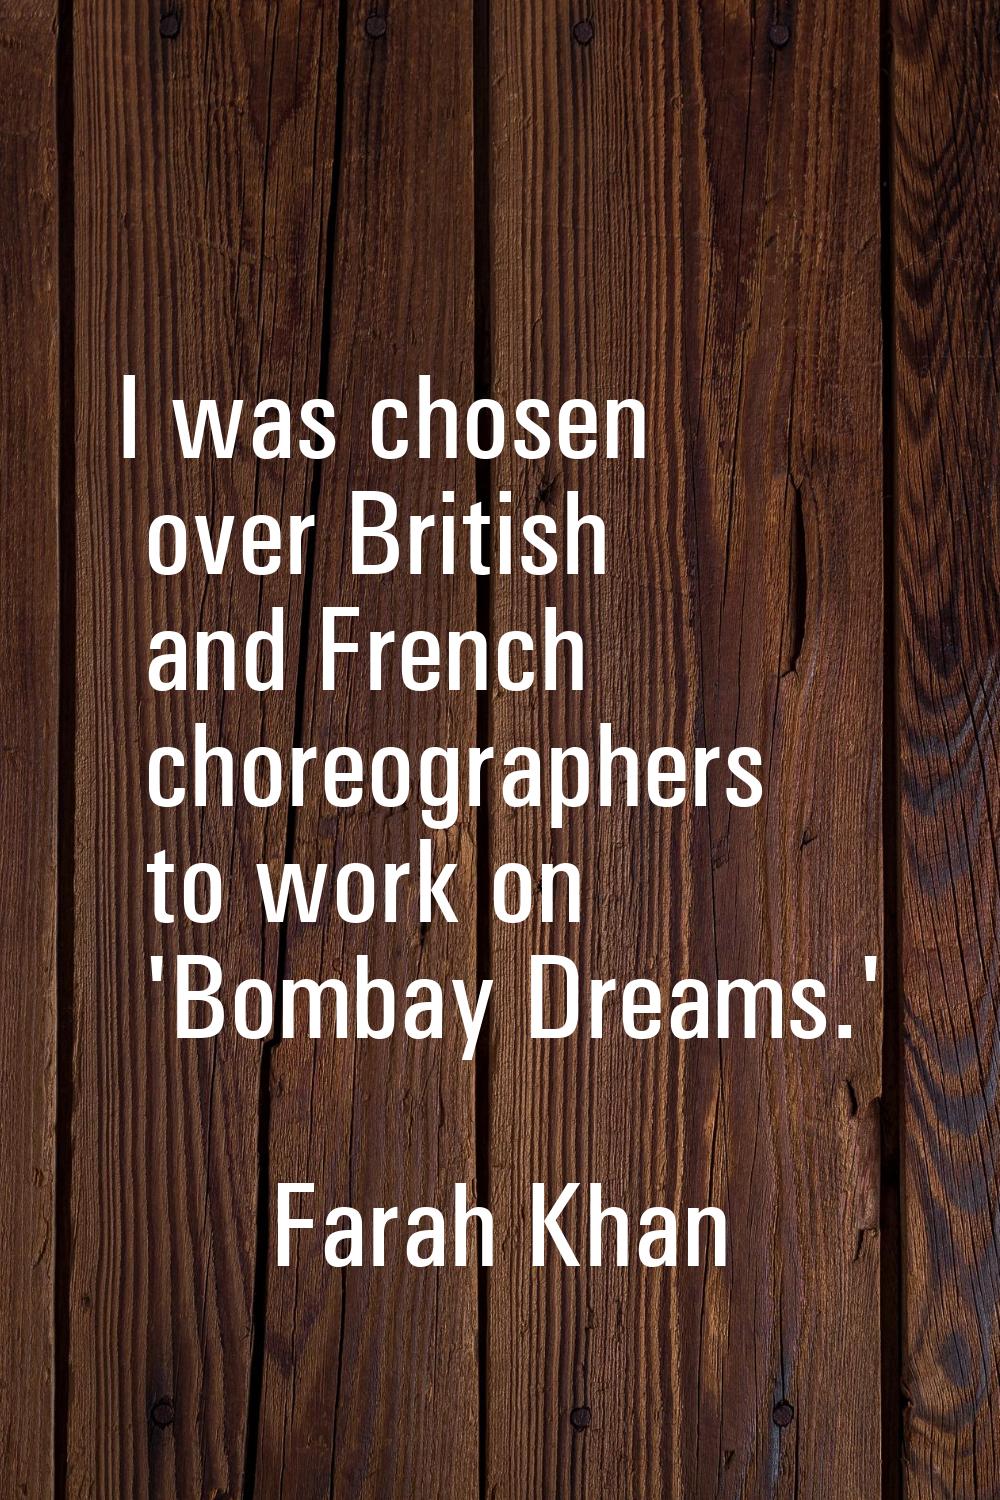 I was chosen over British and French choreographers to work on 'Bombay Dreams.'